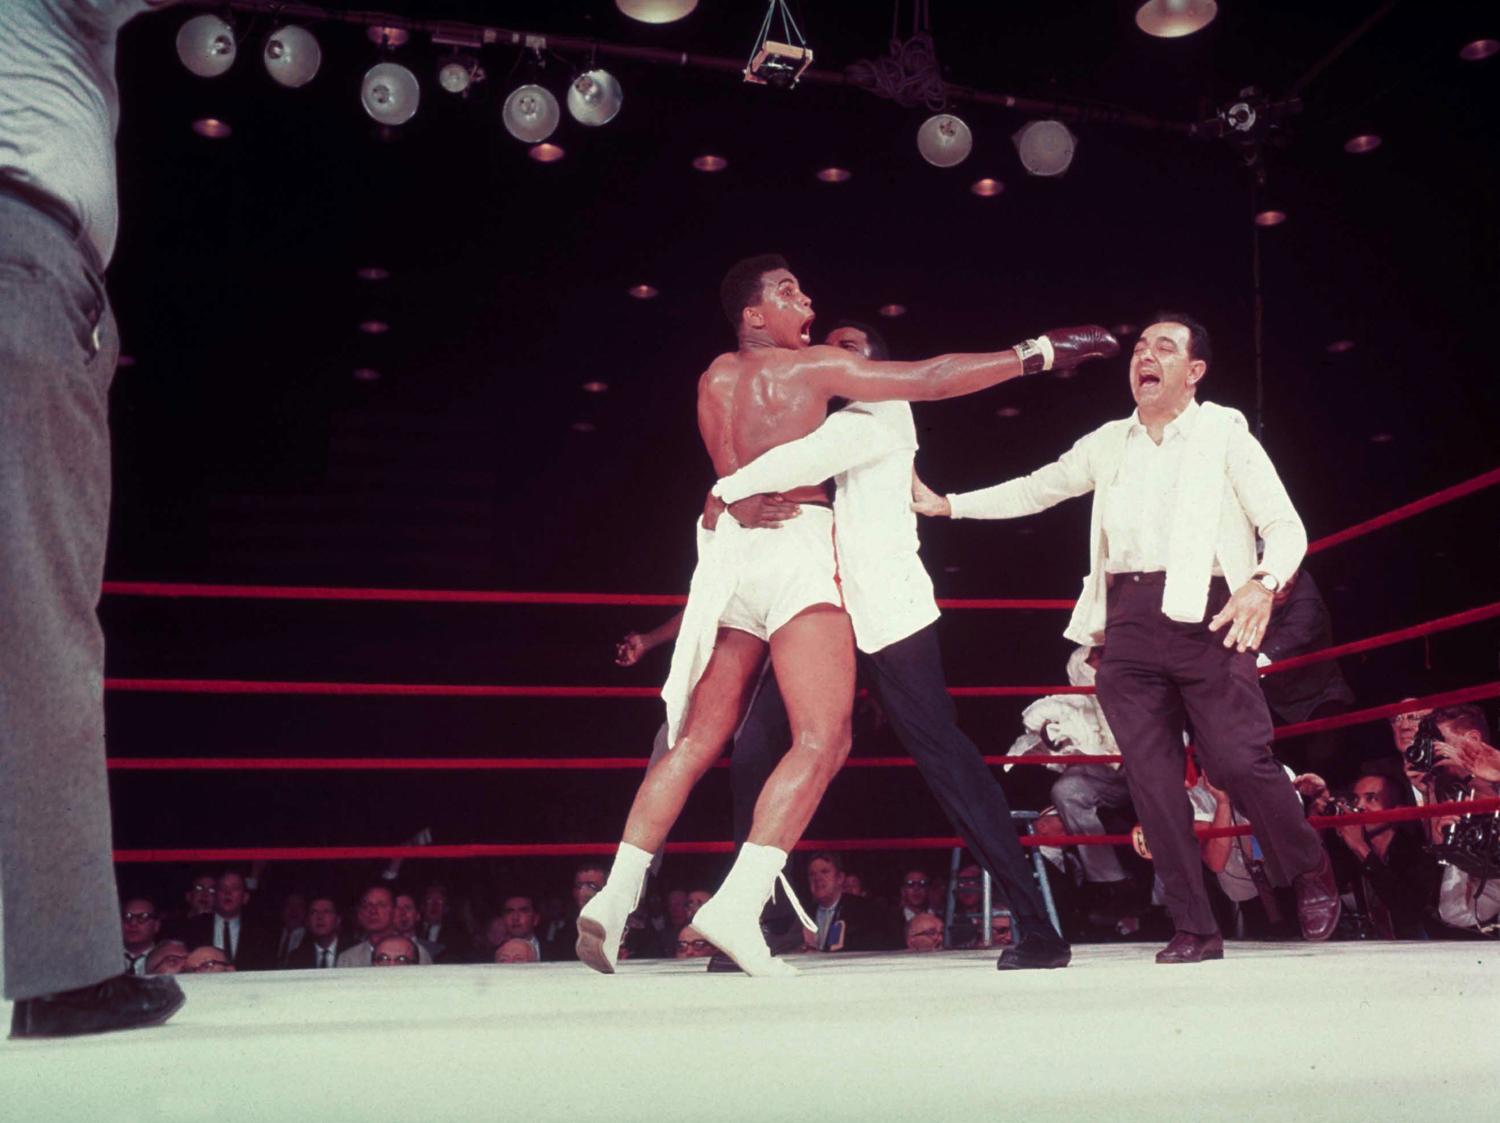 The fight is over. Clay shouts, 'I am so pretty!' as he realizes Liston won't come out for seventh round. Trainer Angelo Dundee rushes to Cassius as handler Bundini Brown tries to restrain the half-hysterical champ.